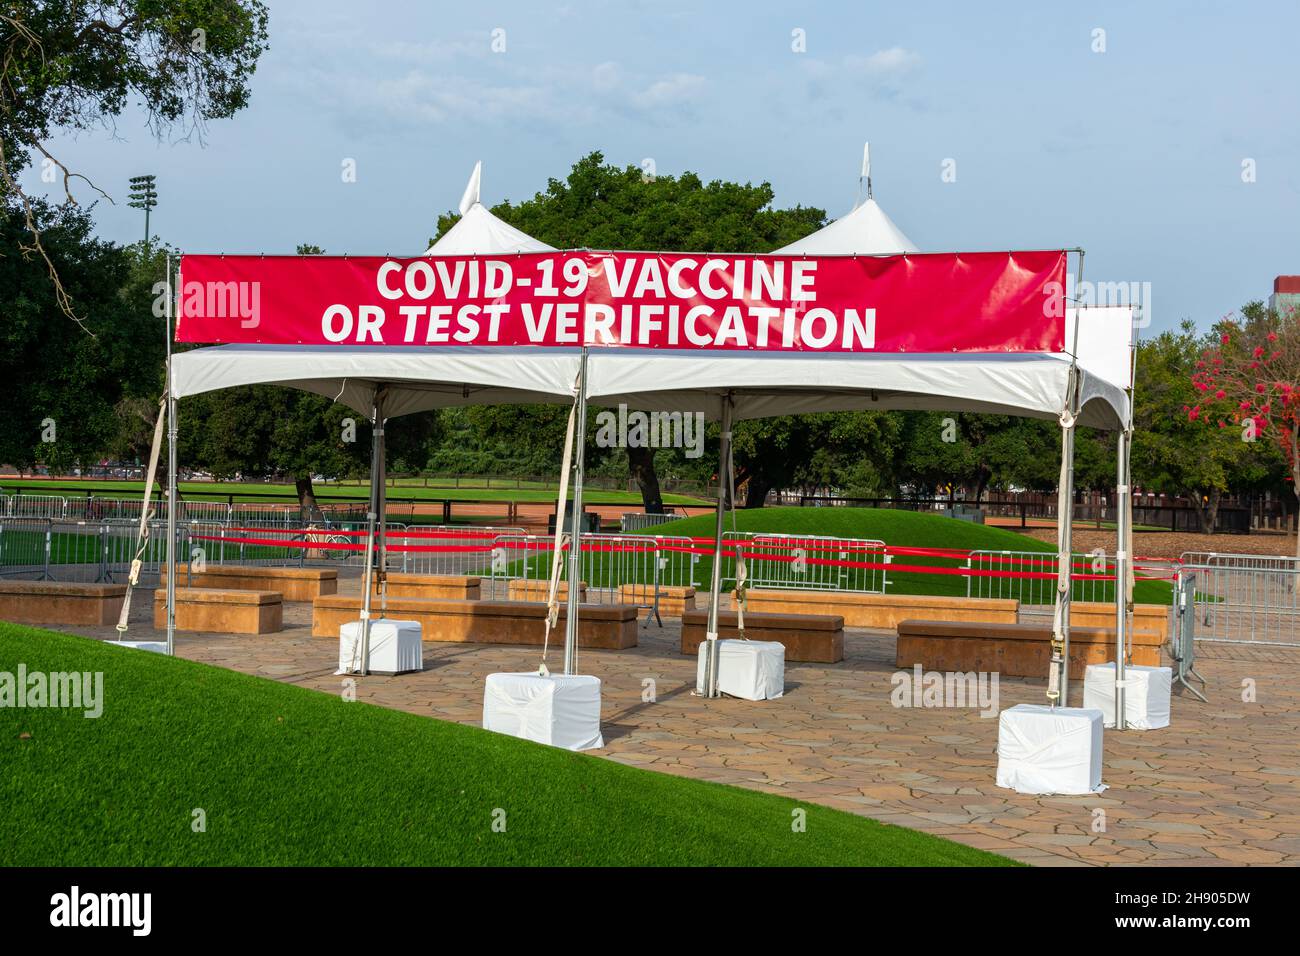 Covid-19 Vaccine or Test Verification sign on banner at the outdoor entrance to public event on stadium Stock Photo